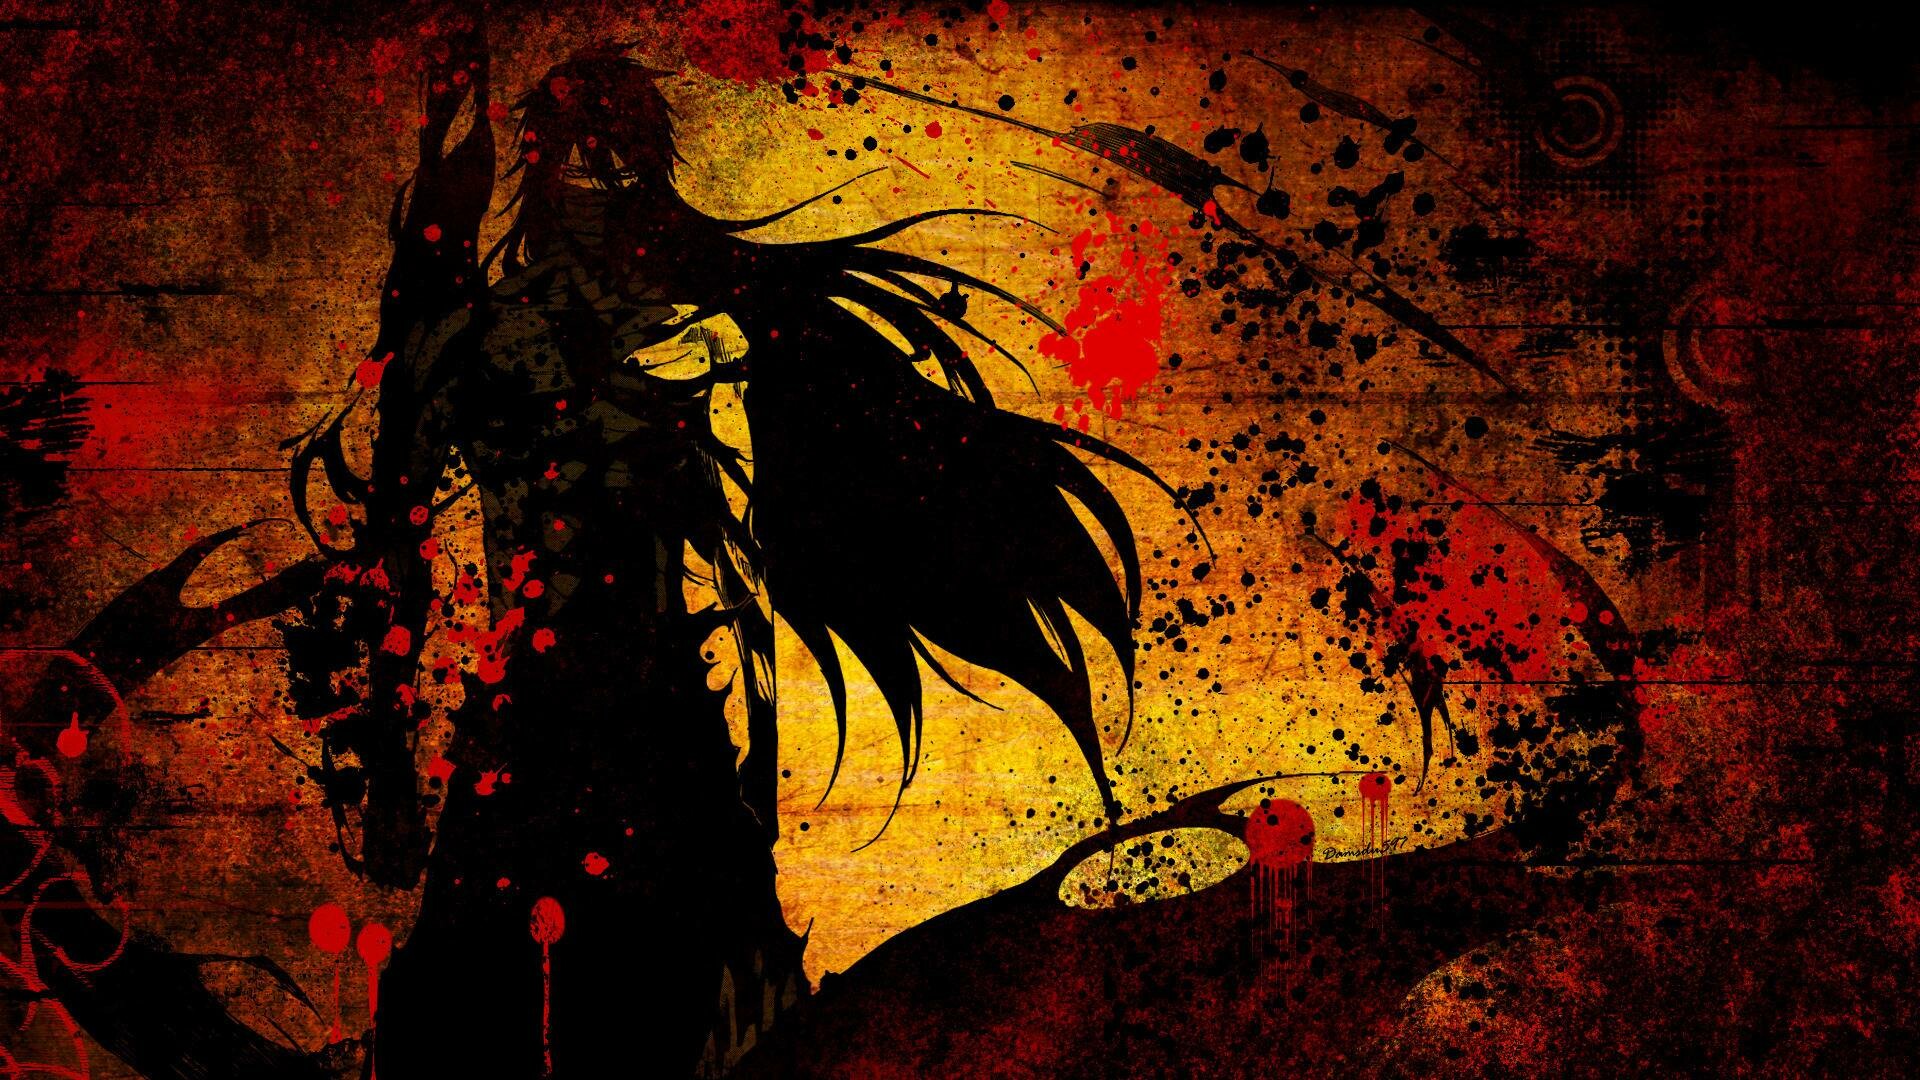 Dark Red Anime Wallpaper: HD, 4K, 5K for PC and Mobile. Download free image for iPhone, Android